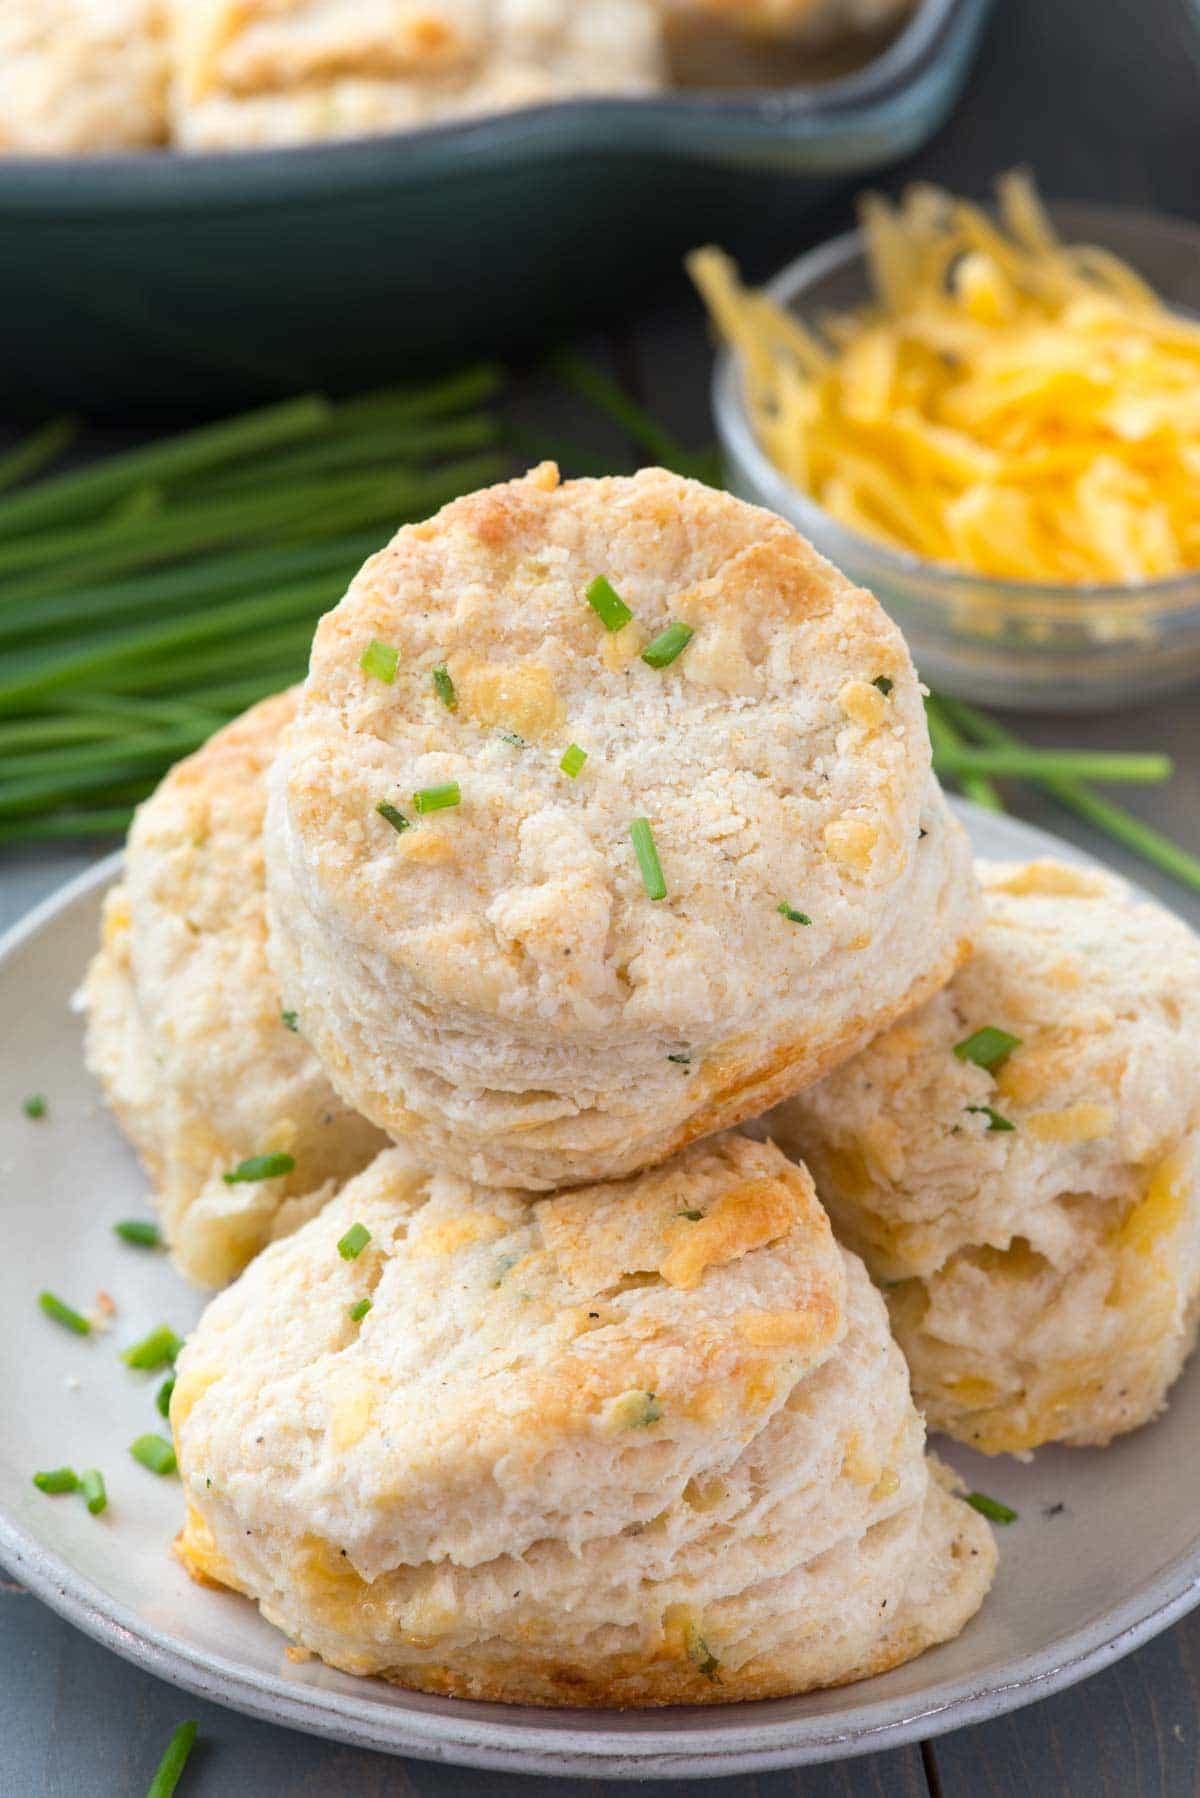 Cheddar Chive Biscuits - this easy buttermilk biscuit recipe is FULL of cheddar cheese and chives! Everyone loved these!